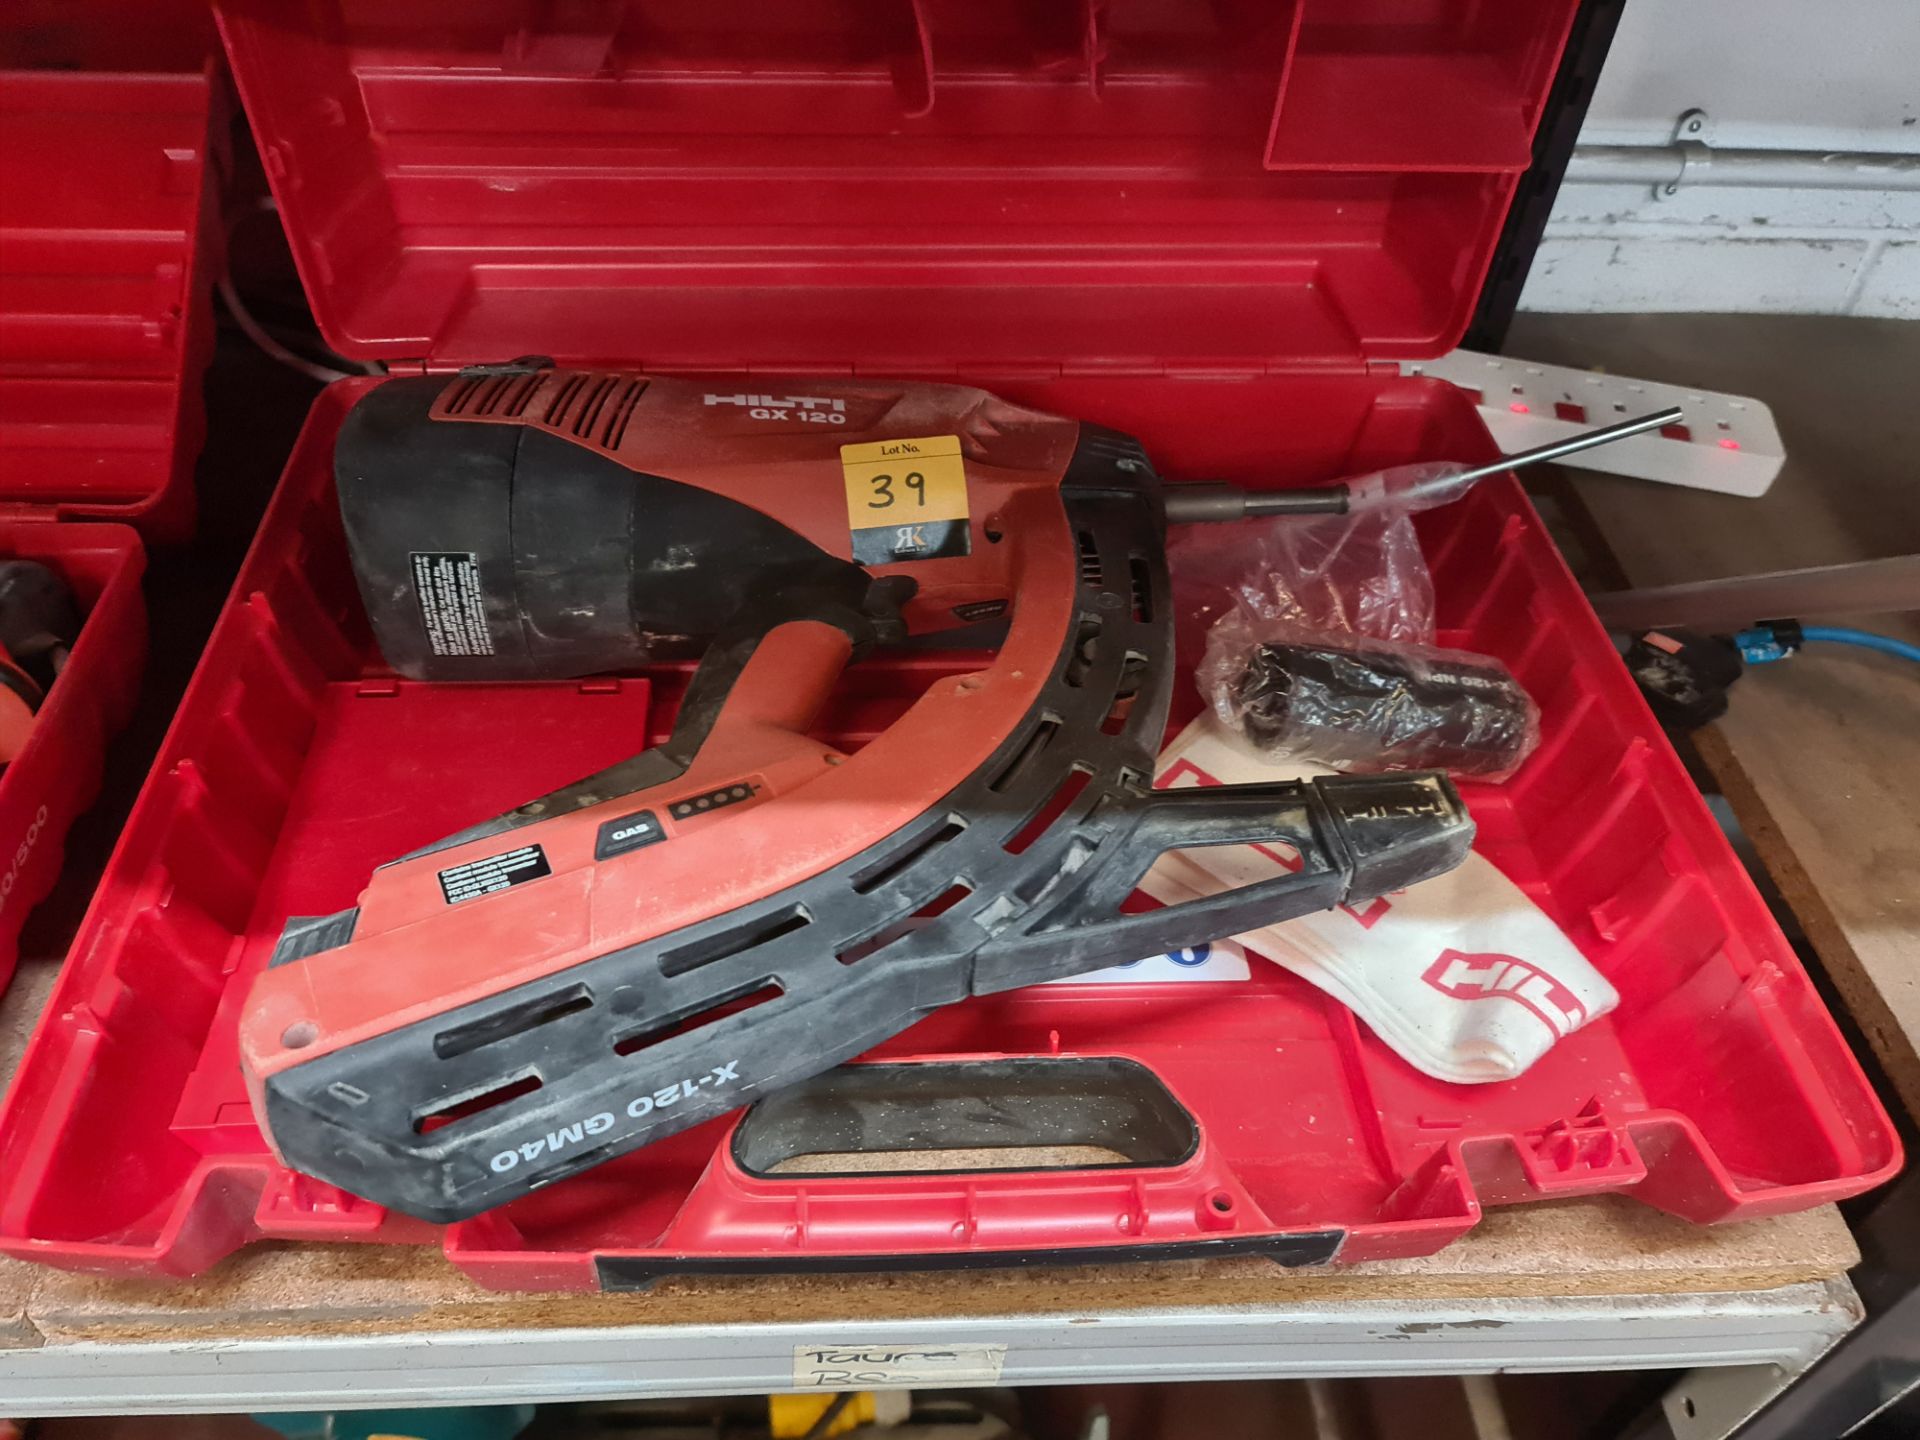 Hilti GX120 gas actuated fastening tool including case & contents as pictured